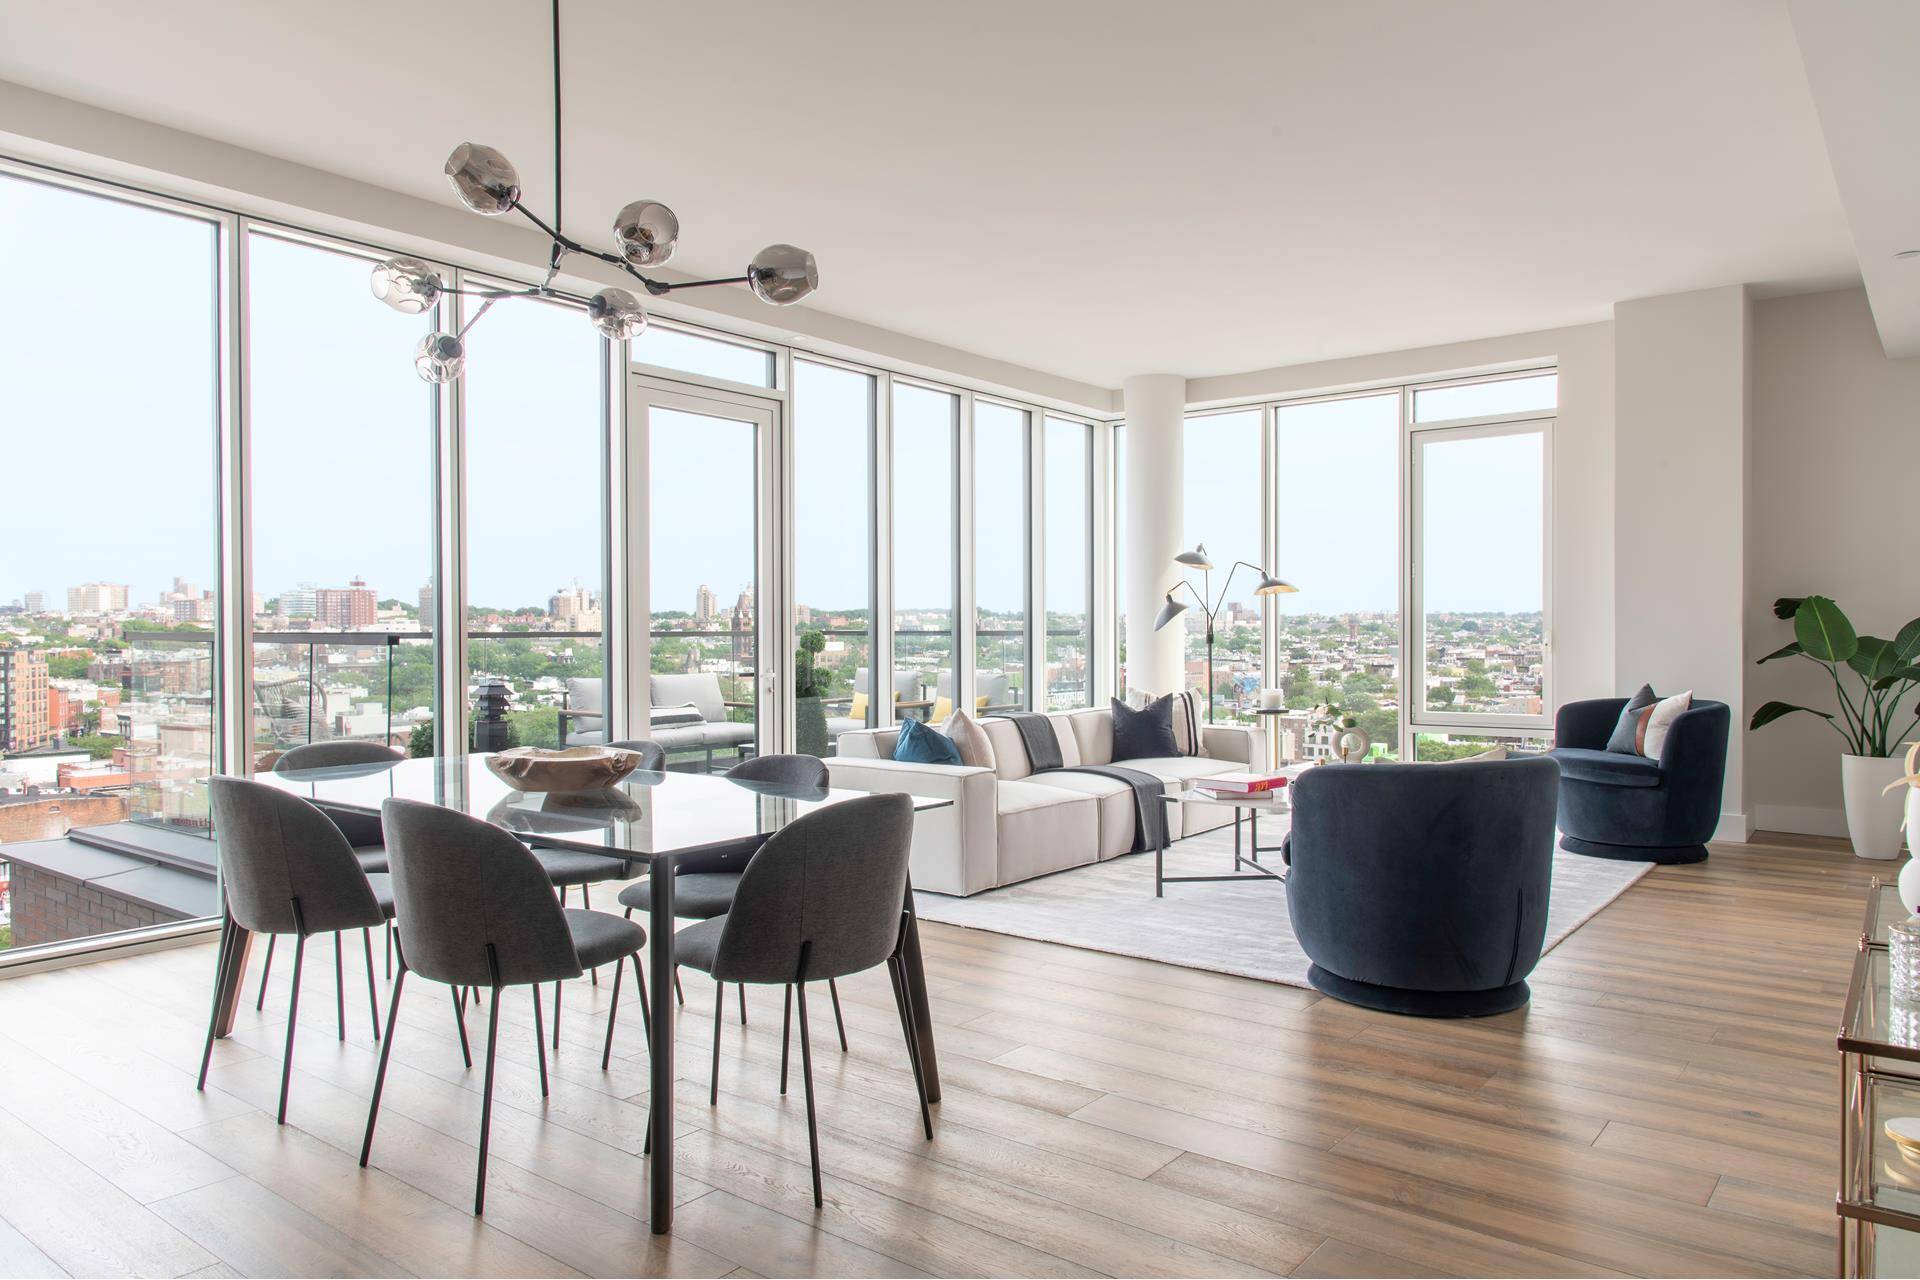 Immediate Occupancy ! Penthouse 1201 is an impeccably designed and expansive 2, 237 square foot 3 bedroom, 3.